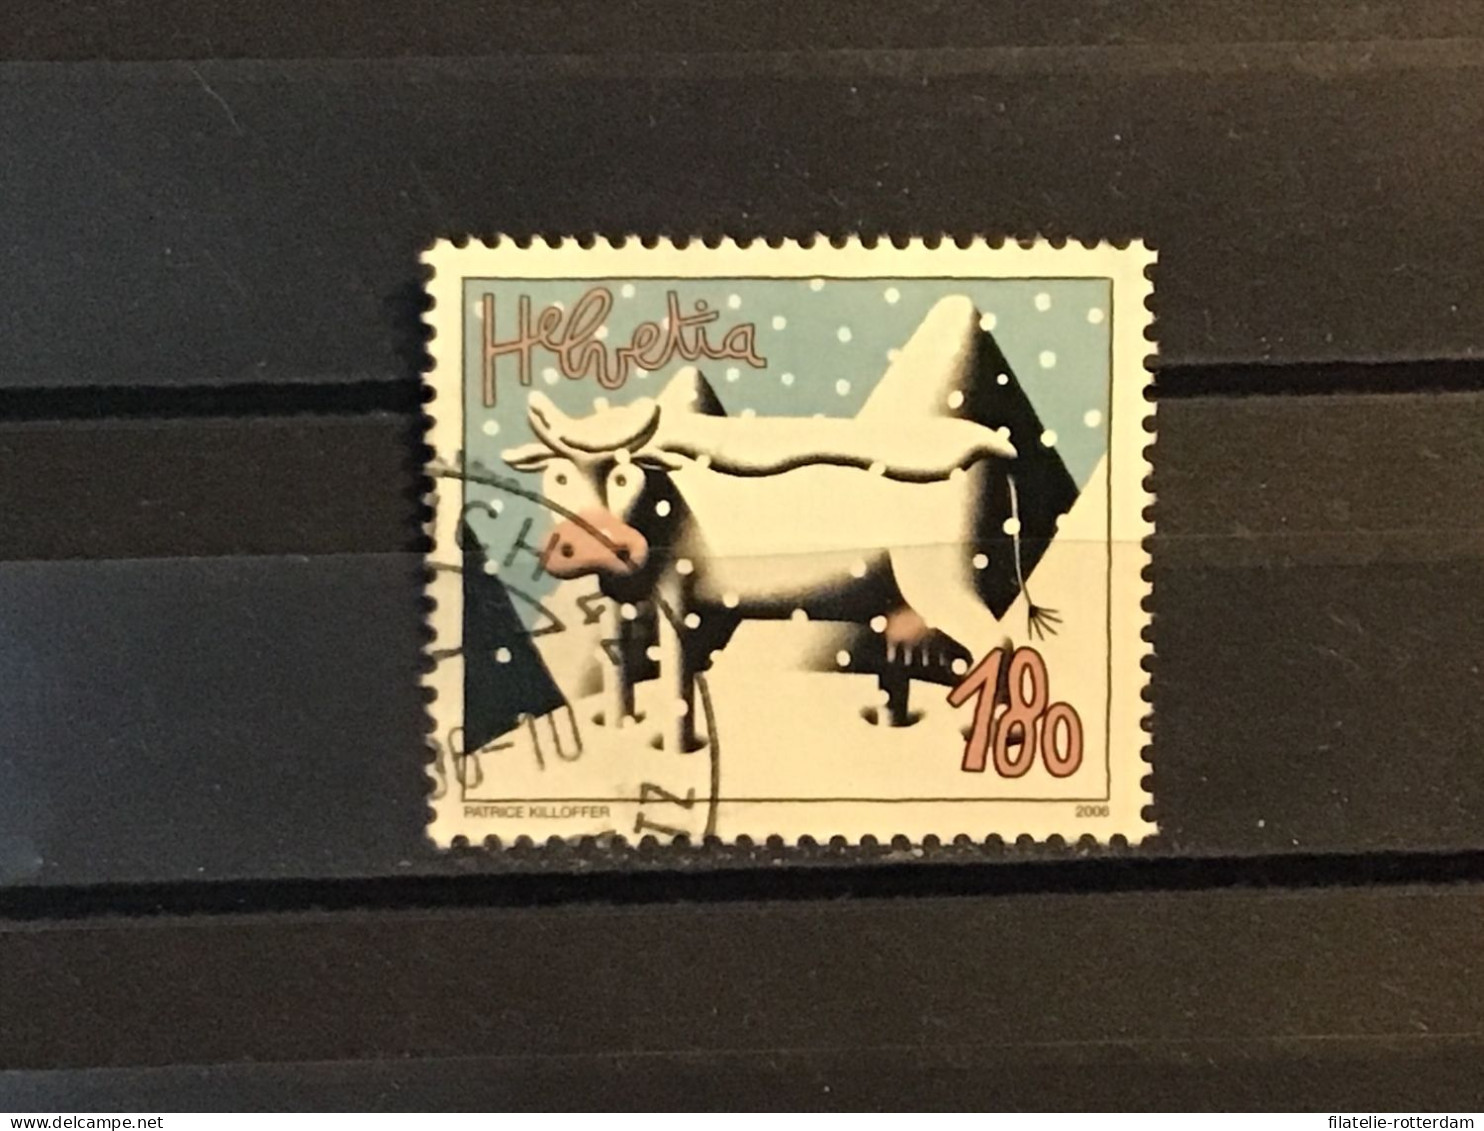 Switzerland / Zwitserland - Cow (180) 2006 - Used Stamps